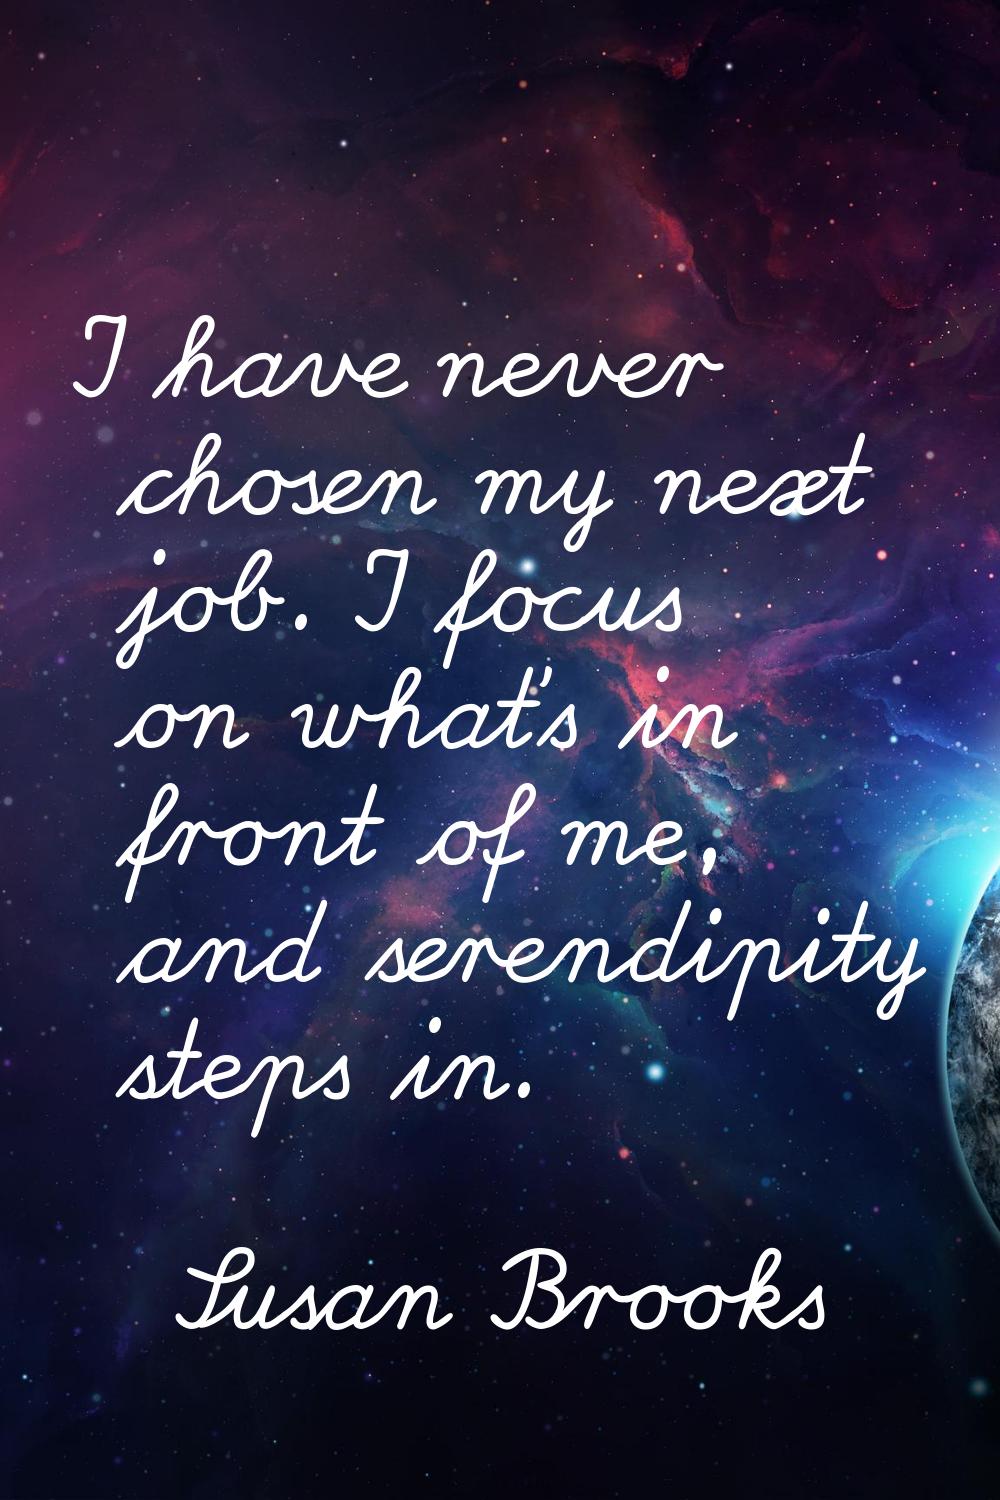 I have never chosen my next job. I focus on what's in front of me, and serendipity steps in.